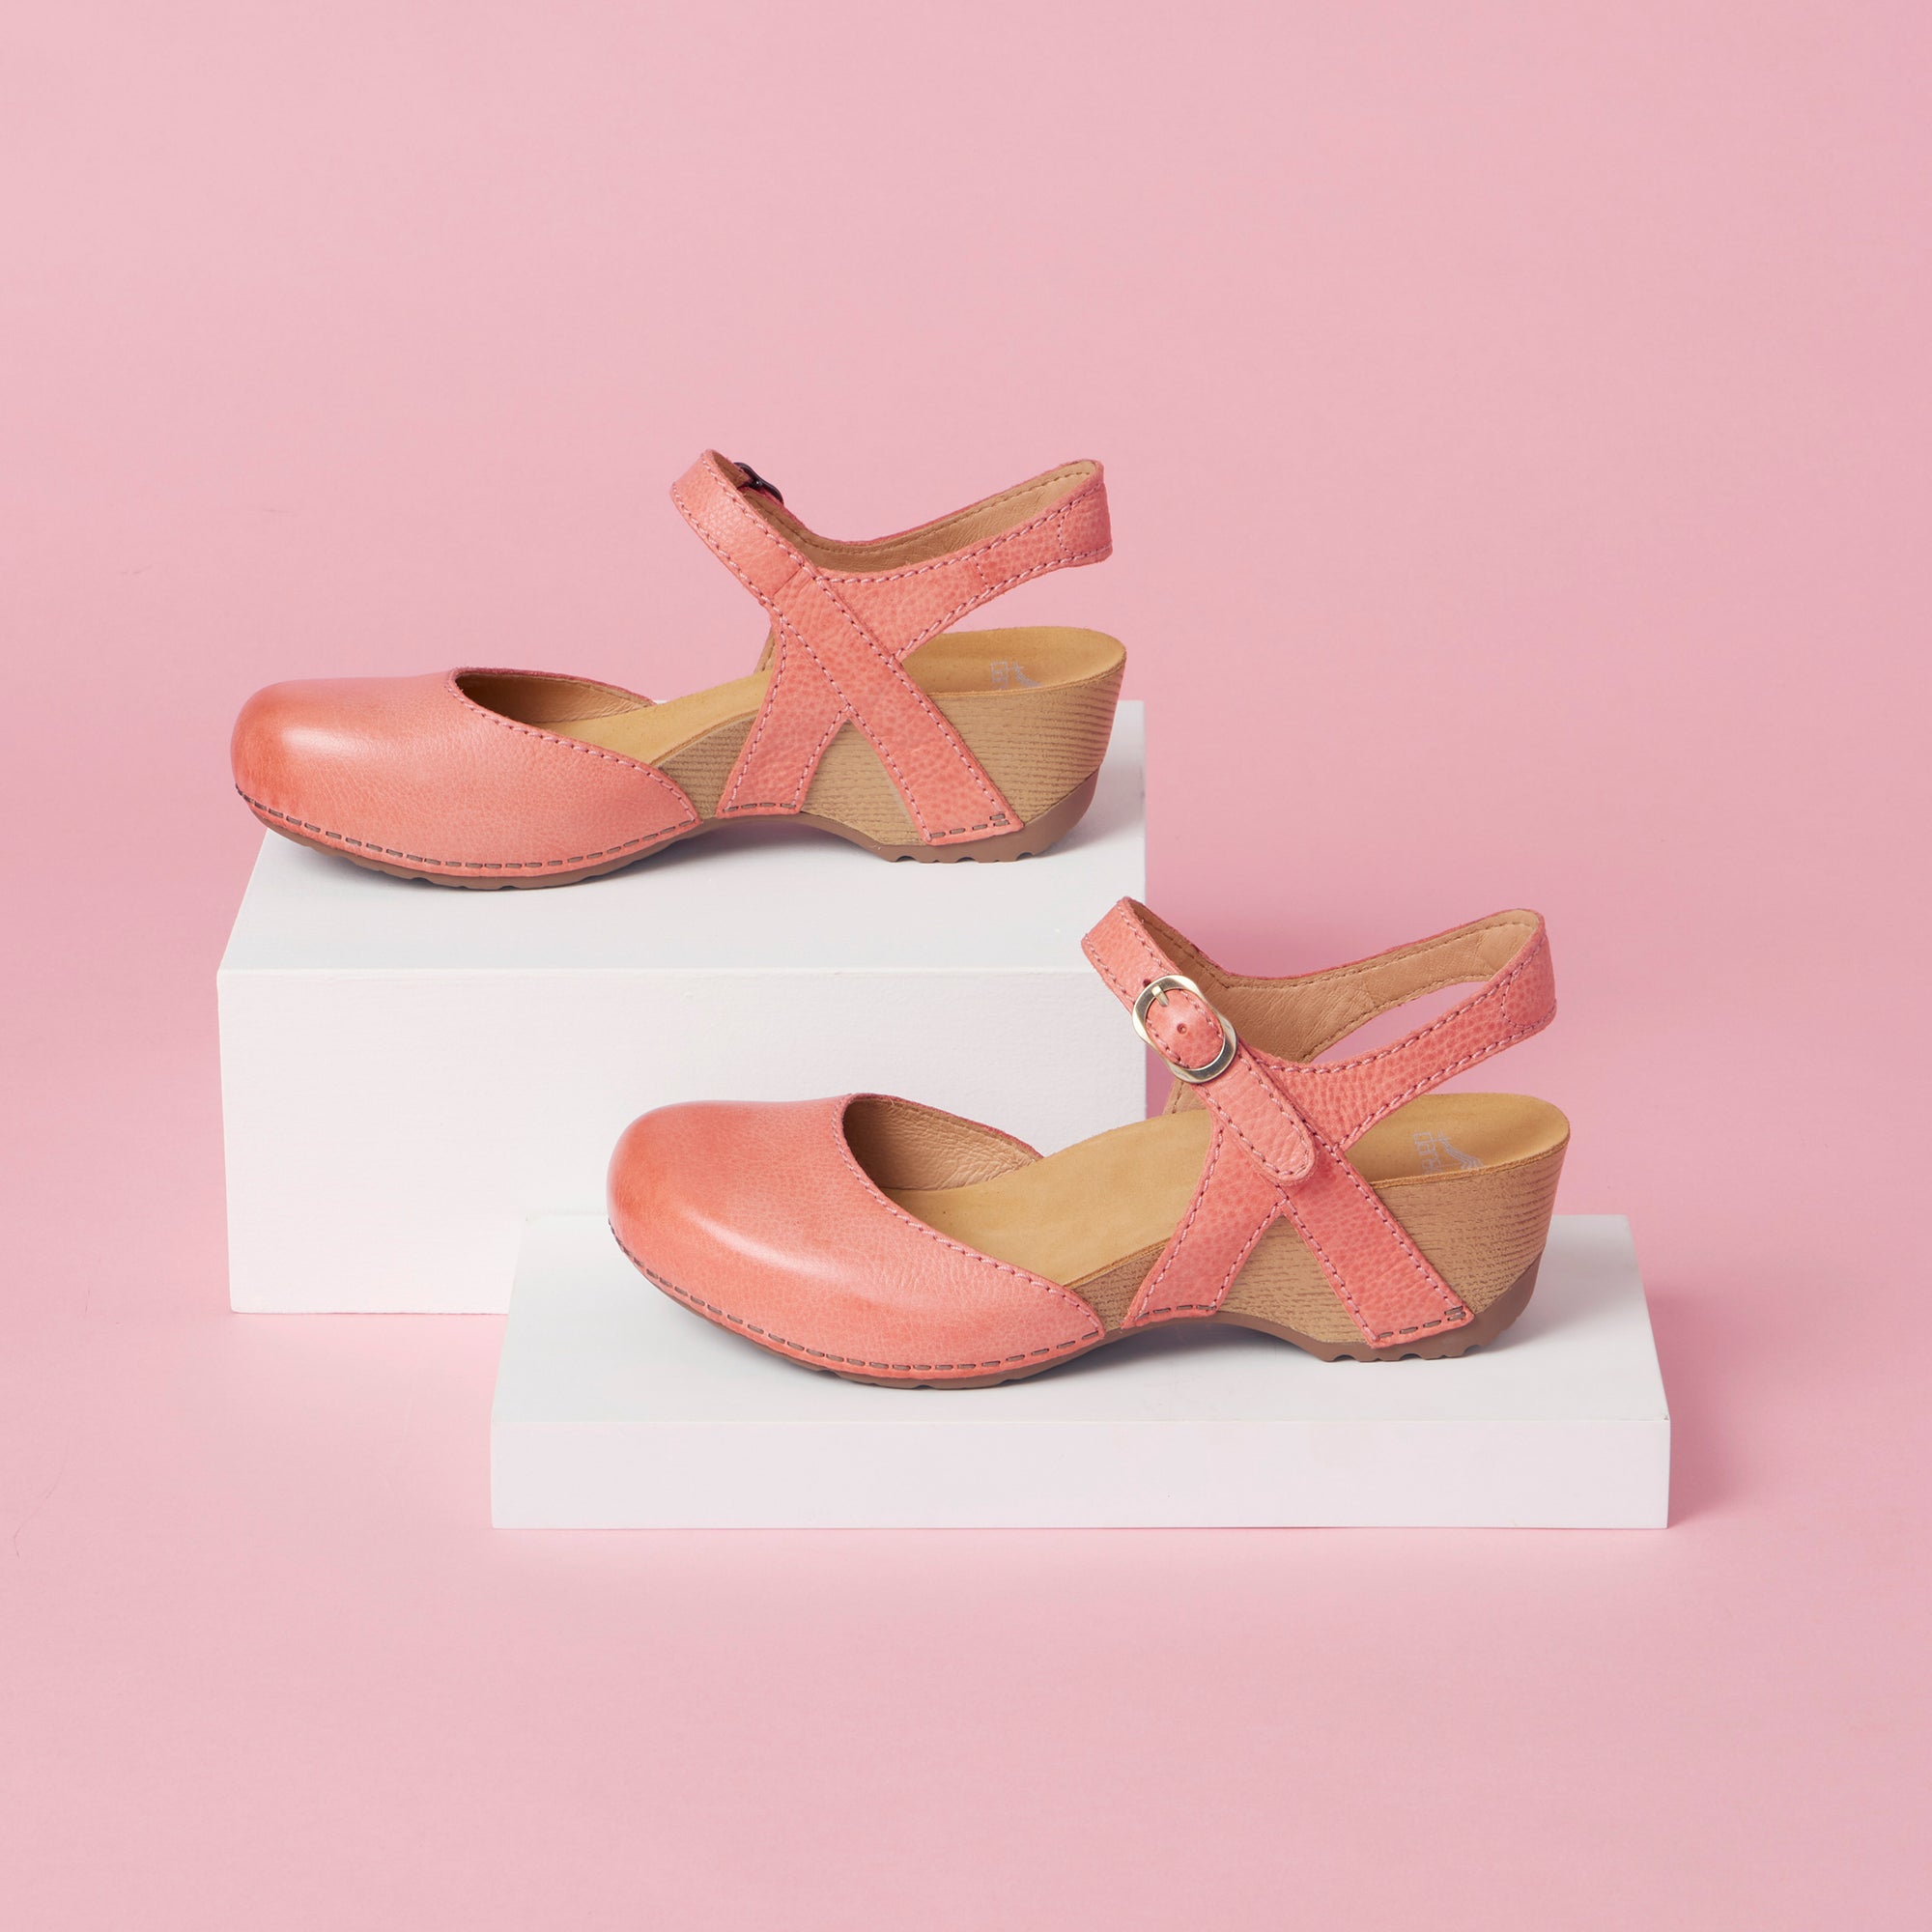 A close look at Mary Jane sandals in coral.